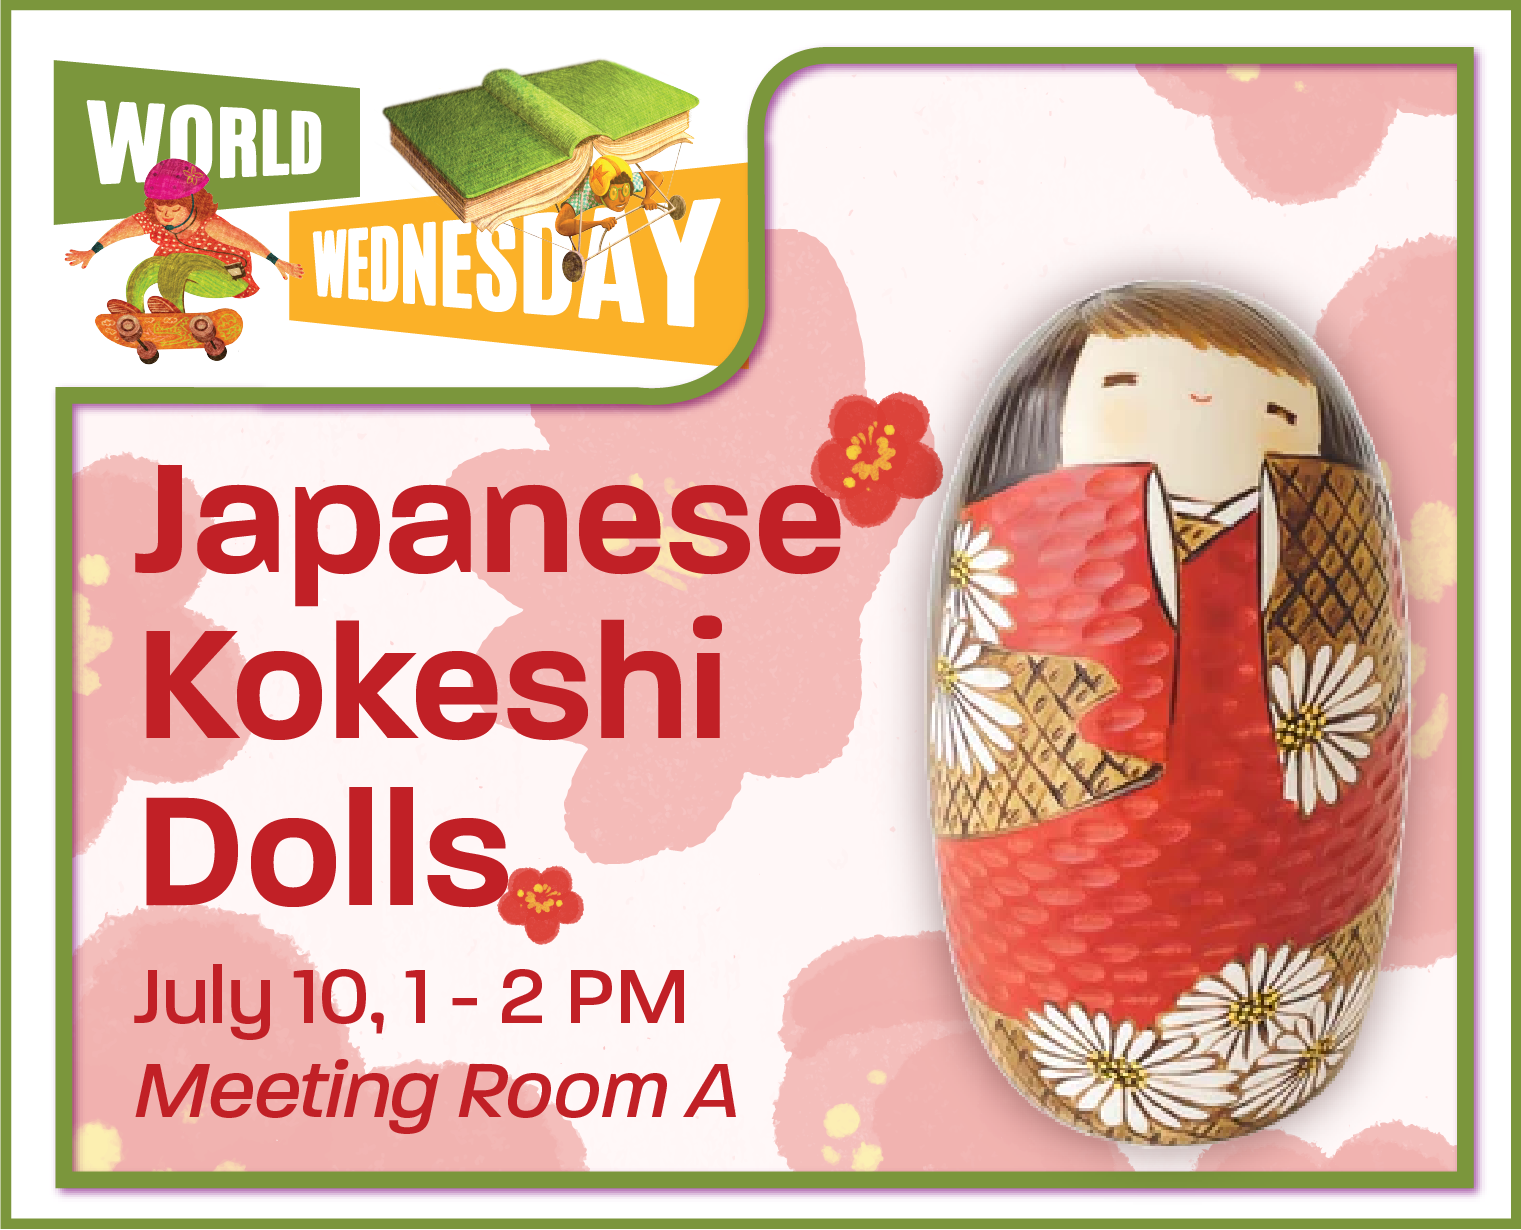 World Wednesday. Japanese Kokeshi Dolls. July 10, 1 to 2 p.m. Meeting Room A. Iowa City Public Library.